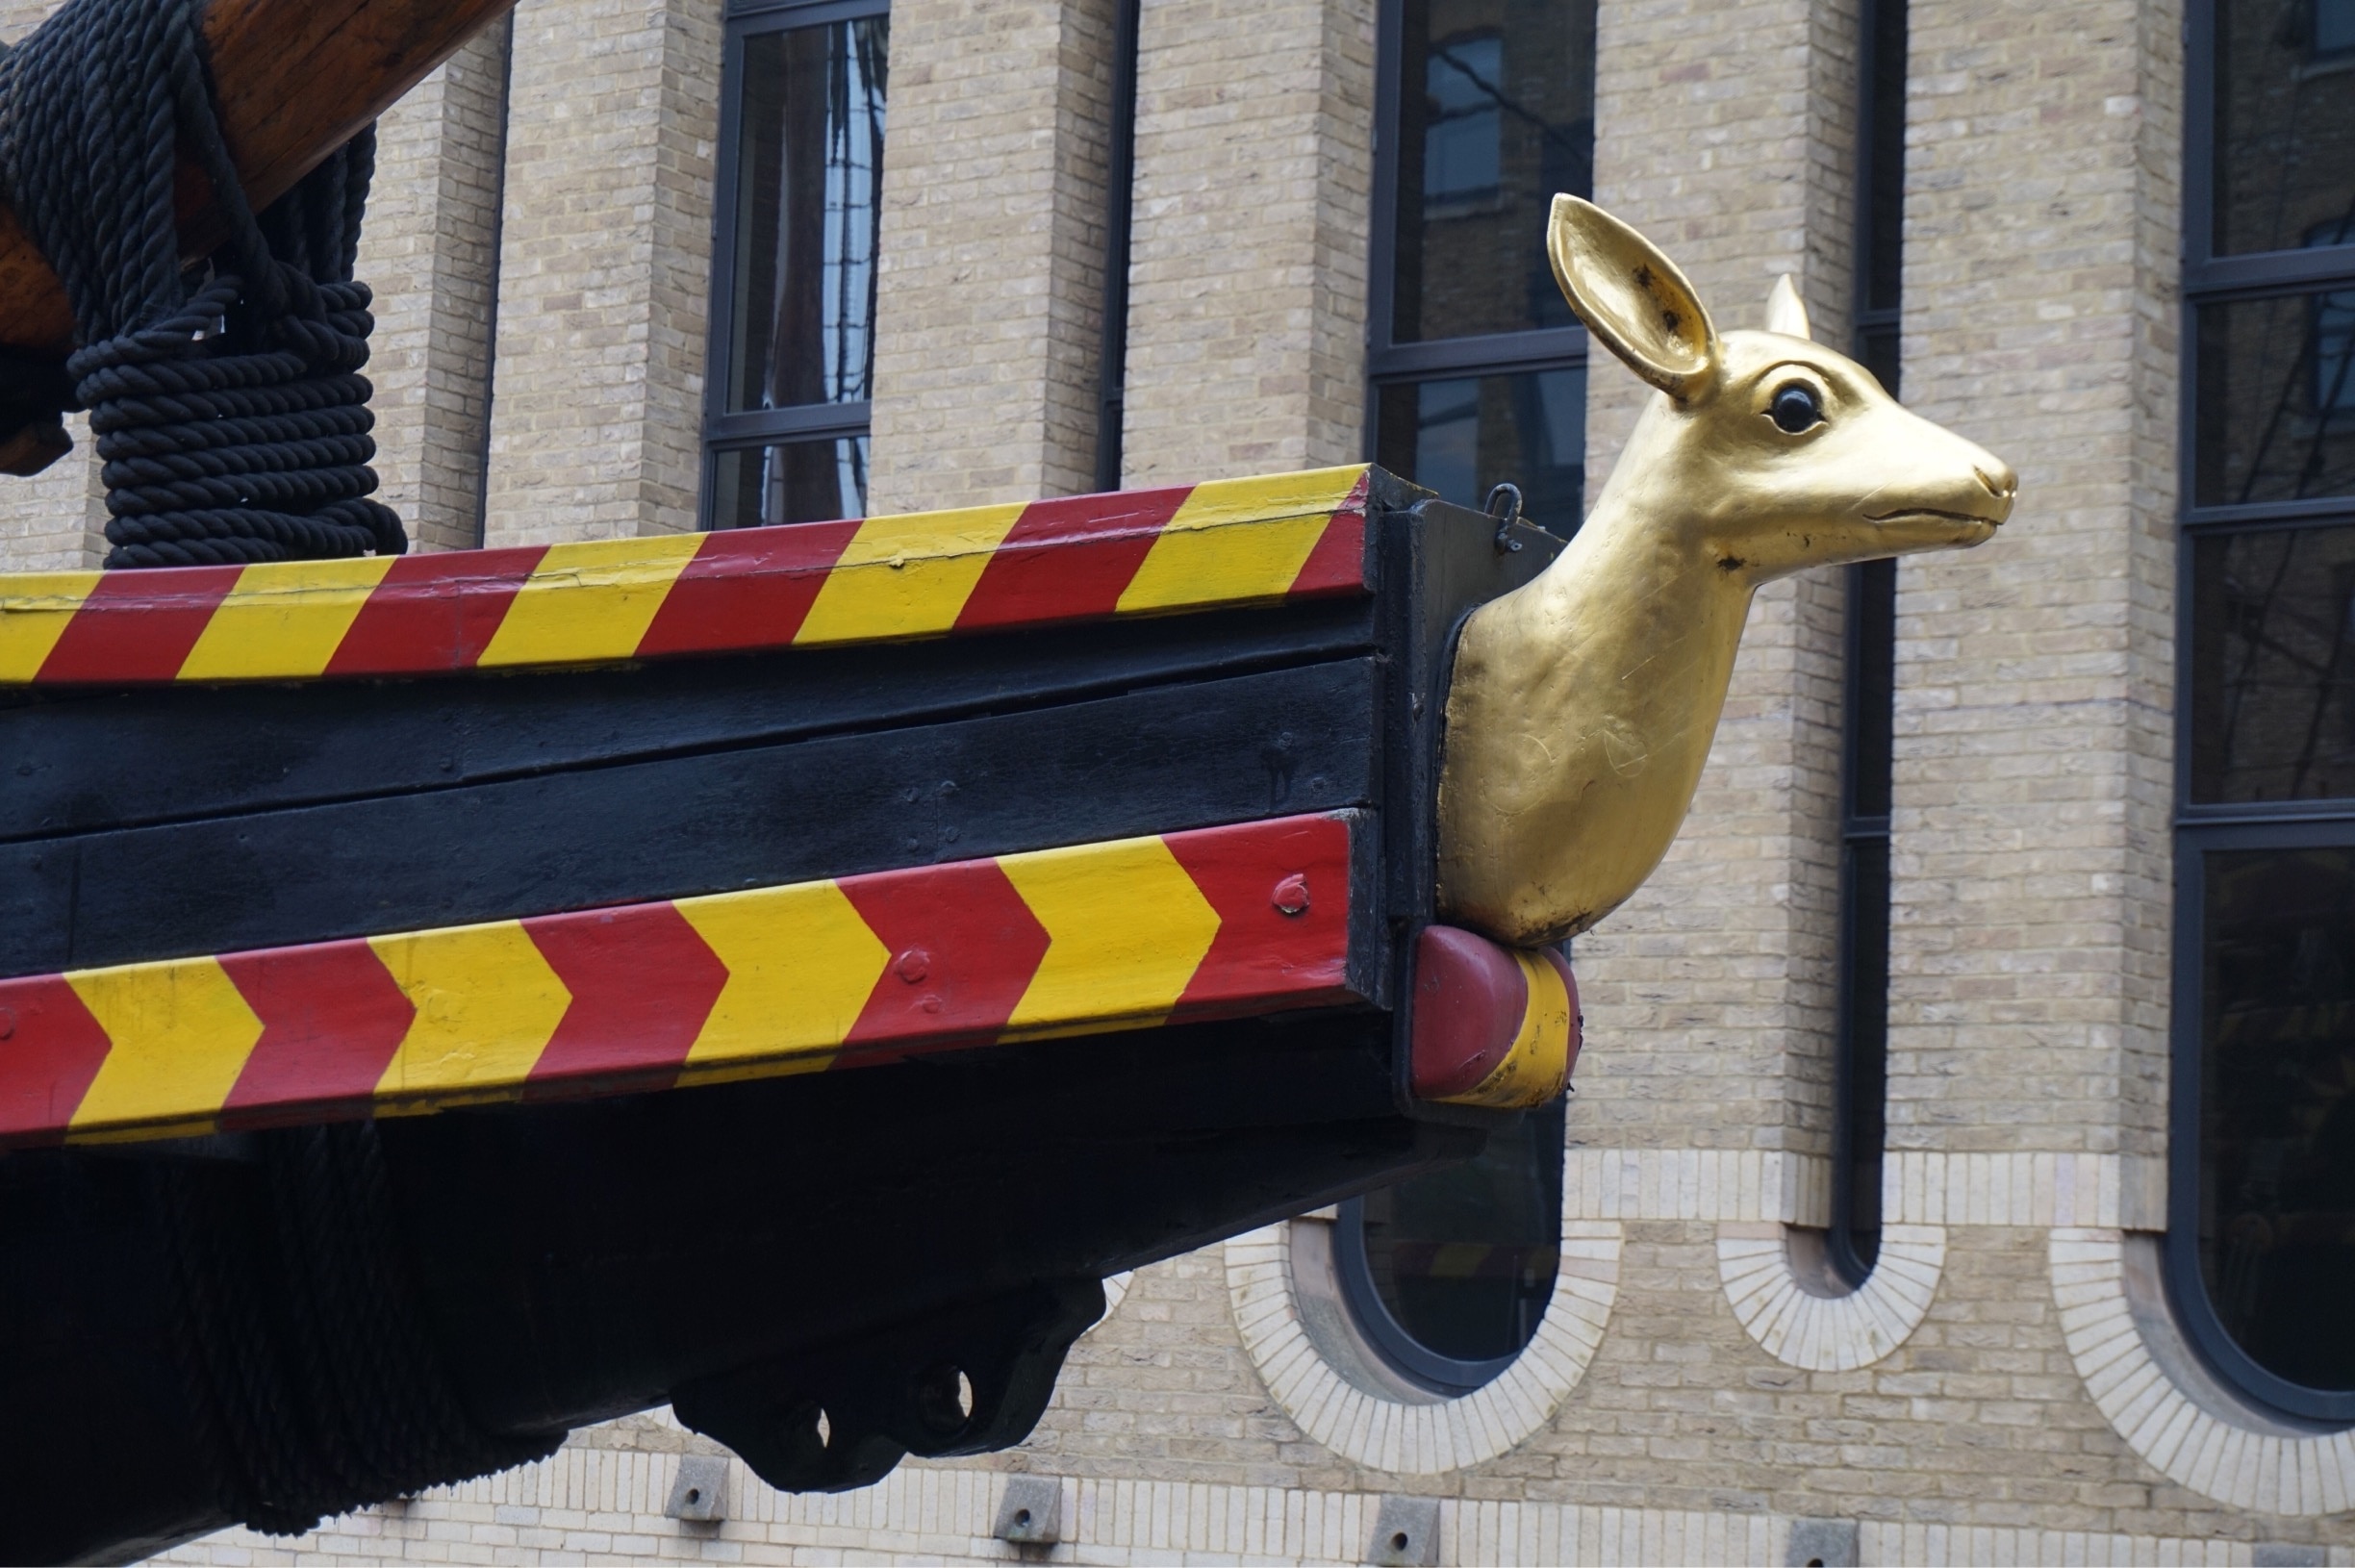 The figurehead of the Golden Hinde